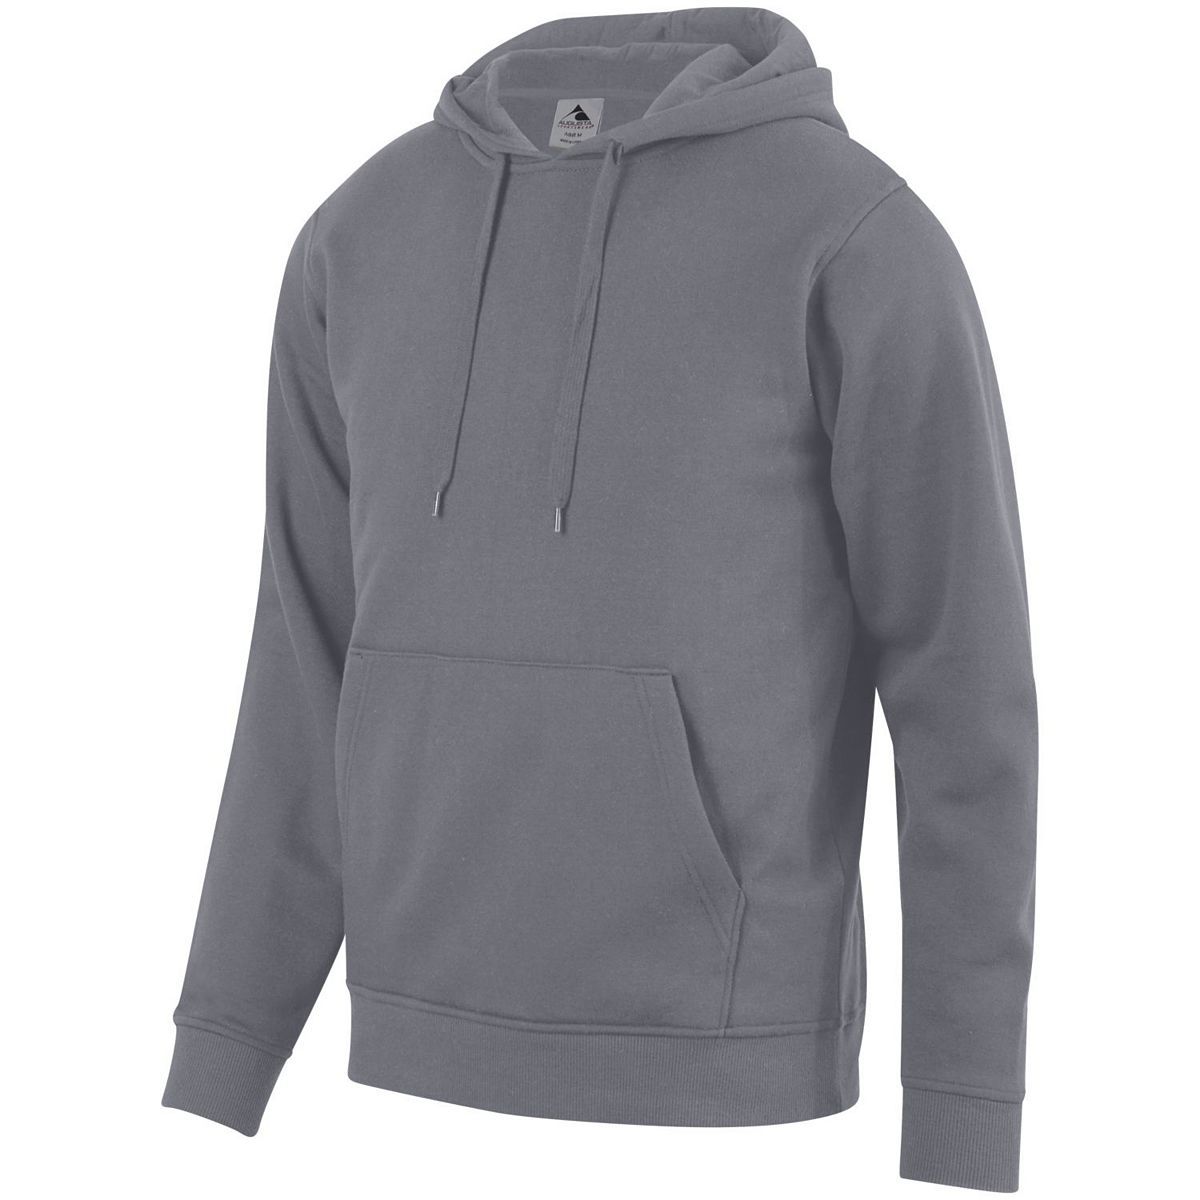 Augusta Sportswear Youth 60/40 Fleece Hoodie in Graphite  -Part of the Youth, Youth-Hoodie, Hoodies, Augusta-Products product lines at KanaleyCreations.com